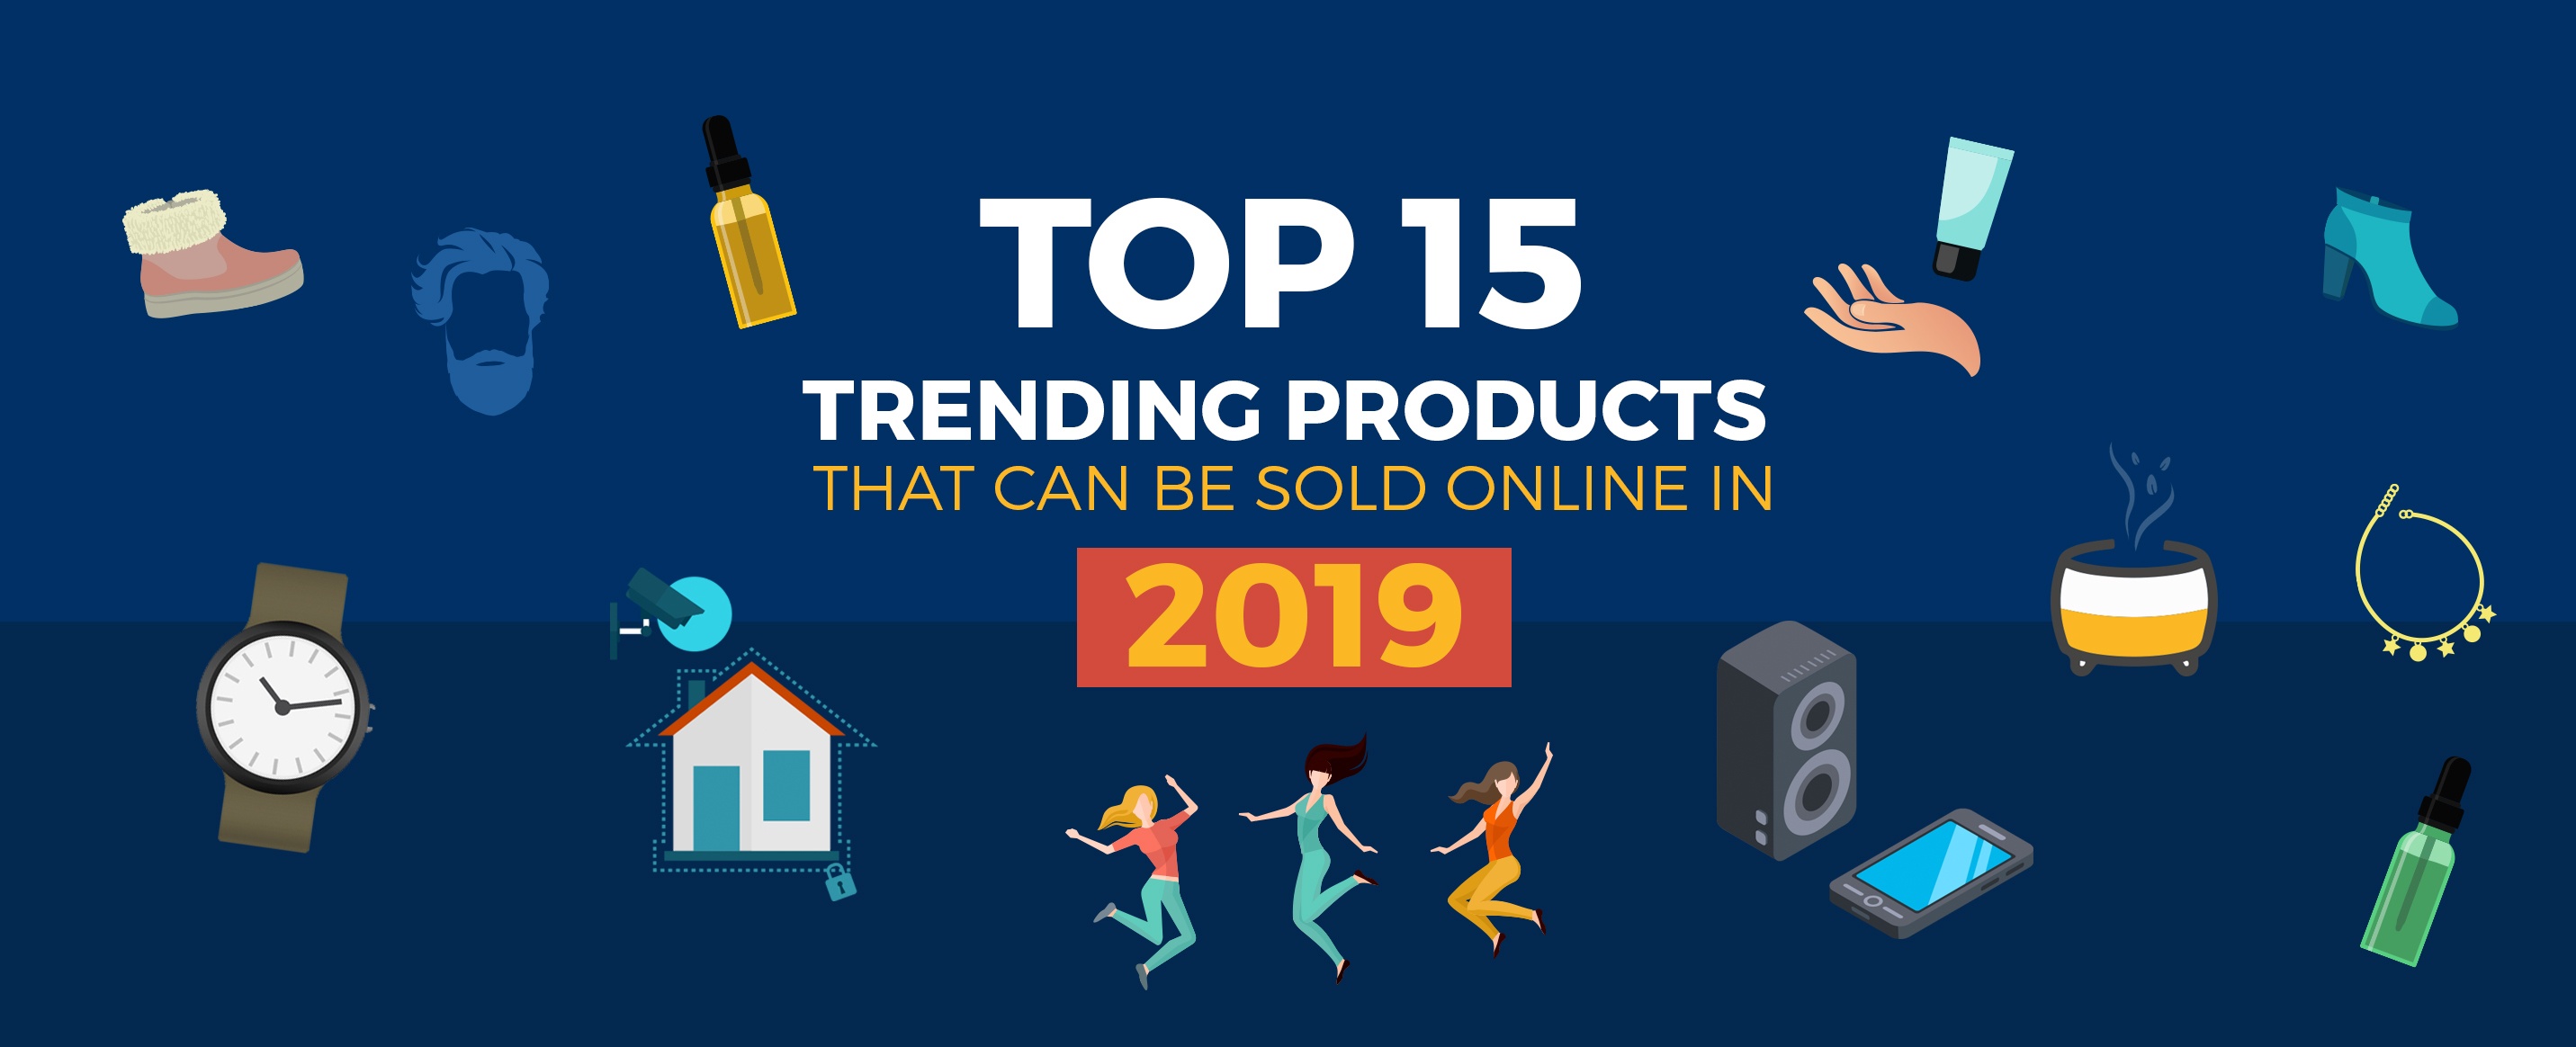 https://www.appseconnect.com/wp-content/uploads/2019/05/Top-15-Trending-Products-That-Can-be-Sold-Online-in-2019-1.jpg